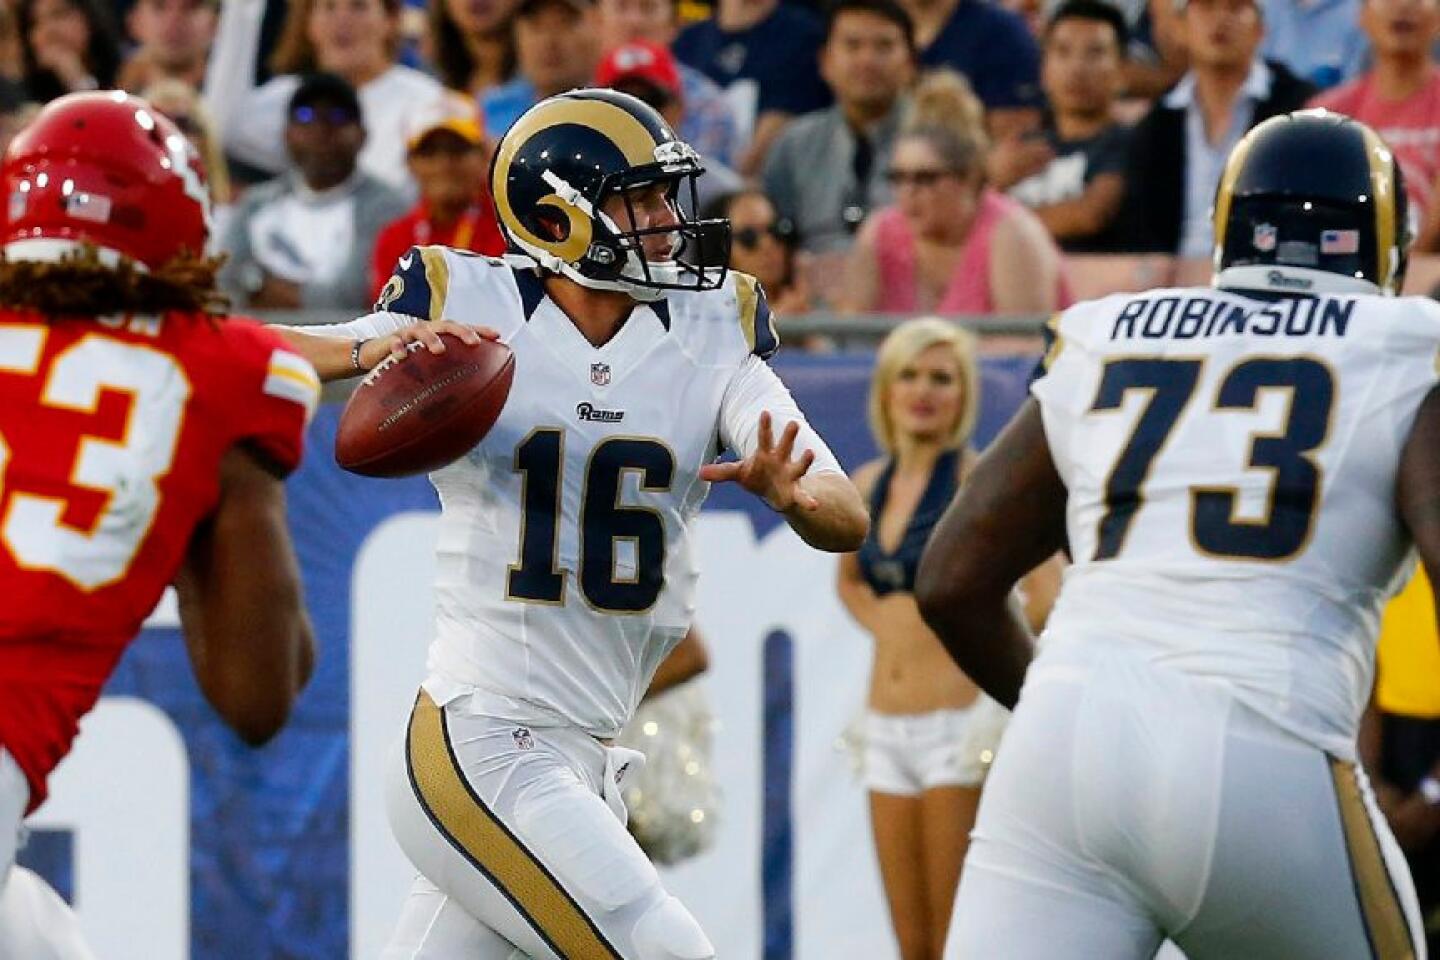 Goff on his first NFL start, even if it is preseason